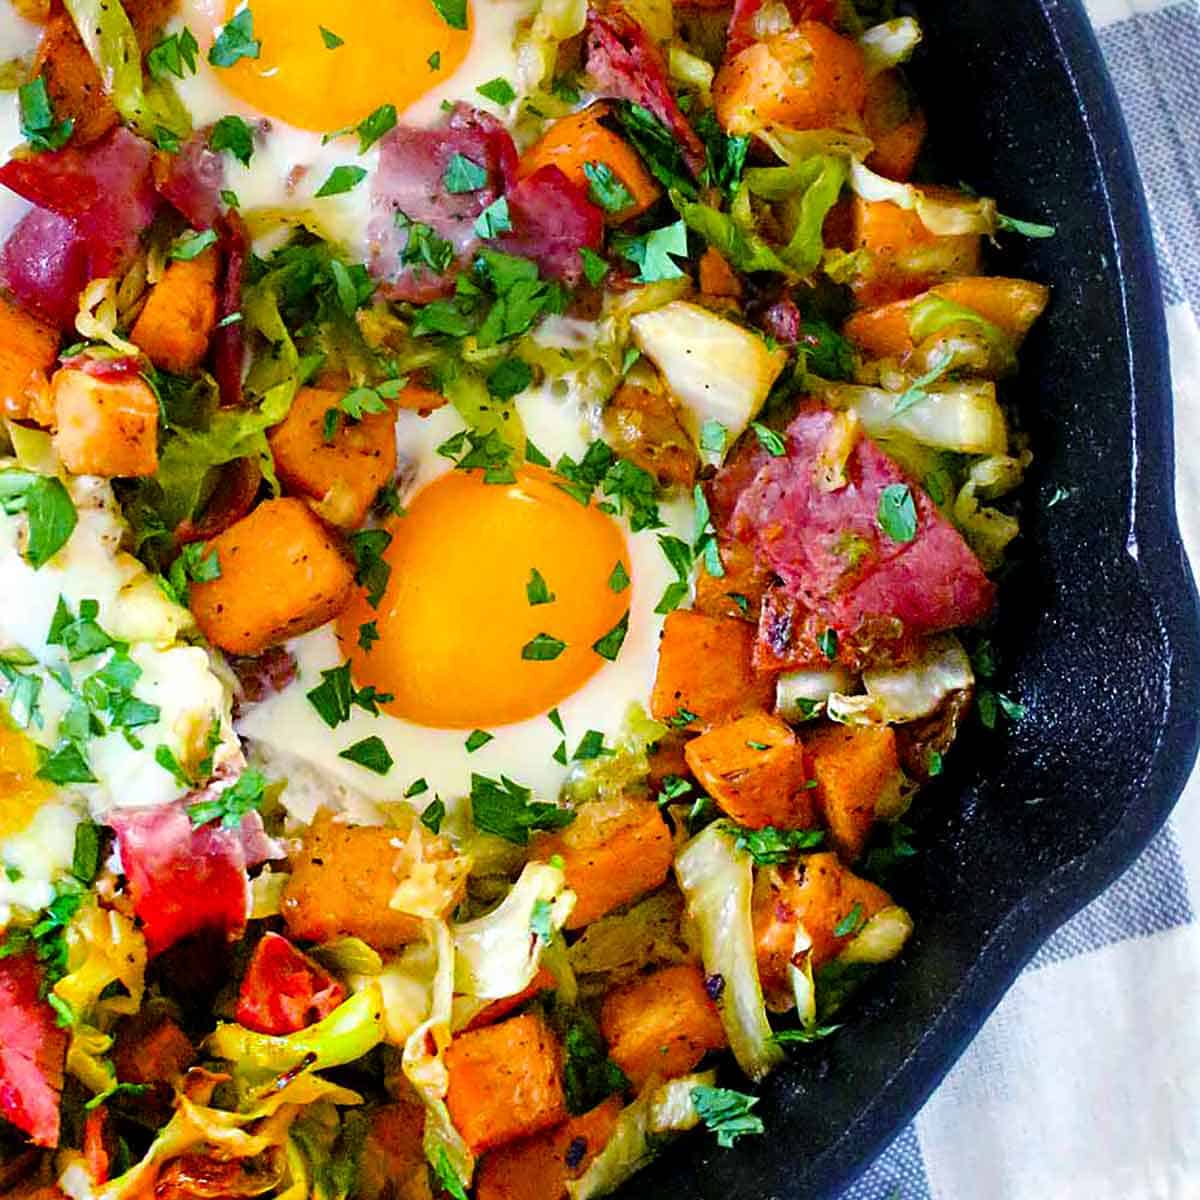 This four ingredient Sweet Potato, Corned Beef, and Cabbage Breakfast Bake is low-carb, gluten-free, and paleo friendly! Start your day with this delicious, nutrient-packed recipe.